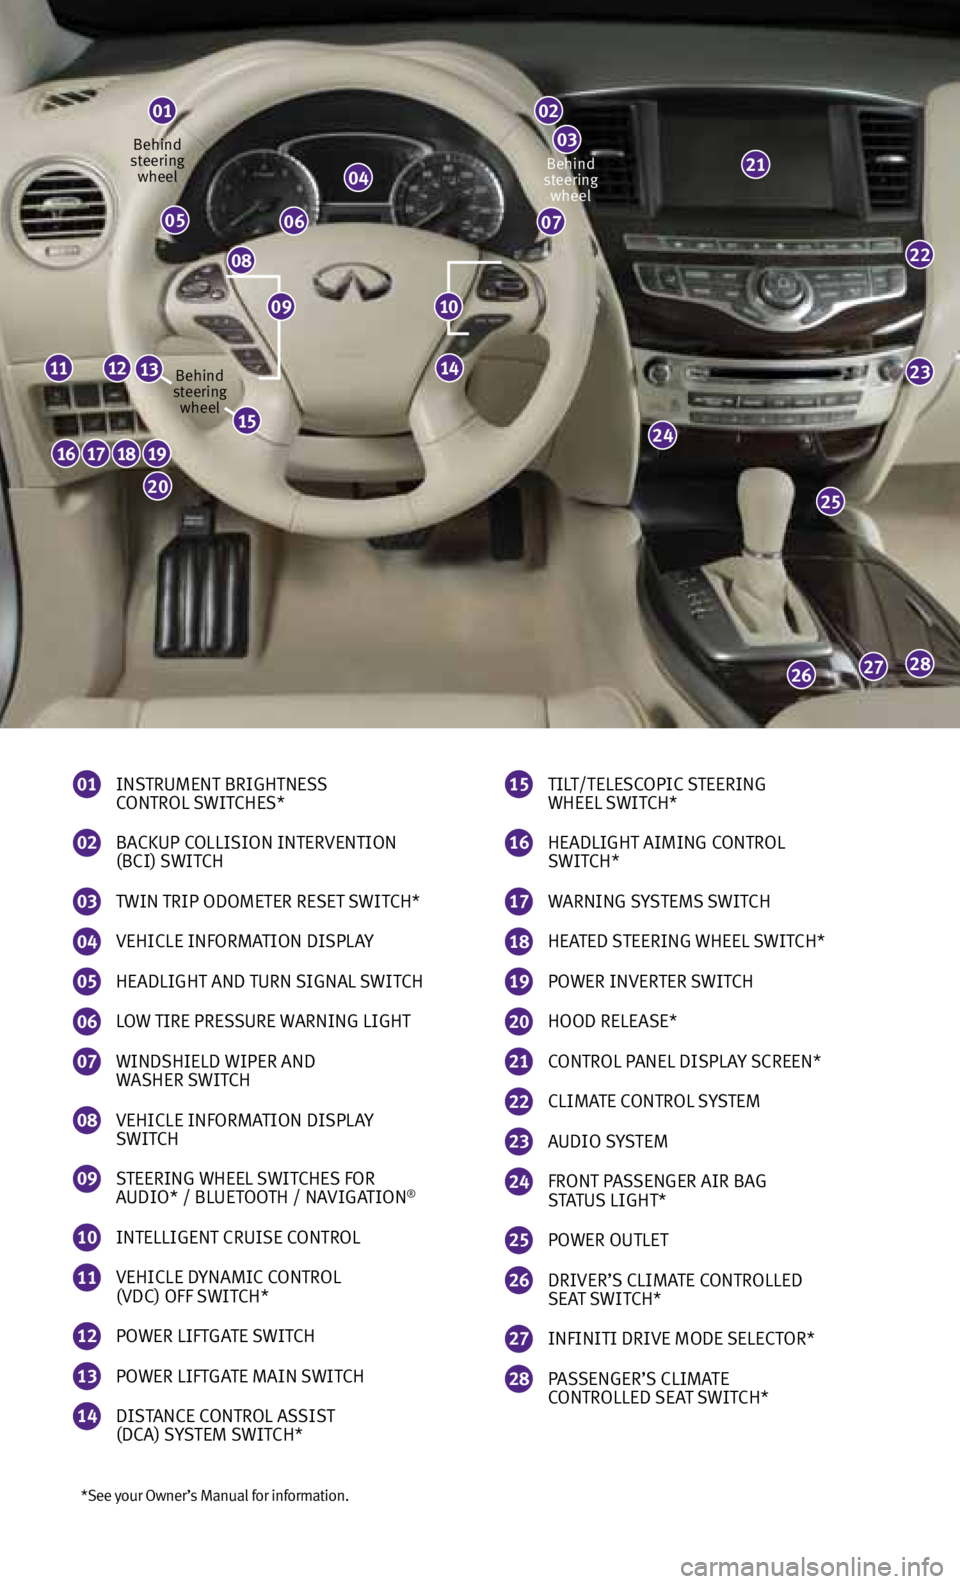 INFINITI JX 2013  Quick Reference Guide *See your Owner’s Manual for information.
01 
INSTRUMENT BRIGHTNESS 
  CONTROL SWITCHES* 
02 
BACKUP COLLISION INTERVENTION 
  (BCI) SWITCH 
03 
TWIN TRIP ODOMETER RESET SWITCH* 
04  
VEHICLE  INfOR